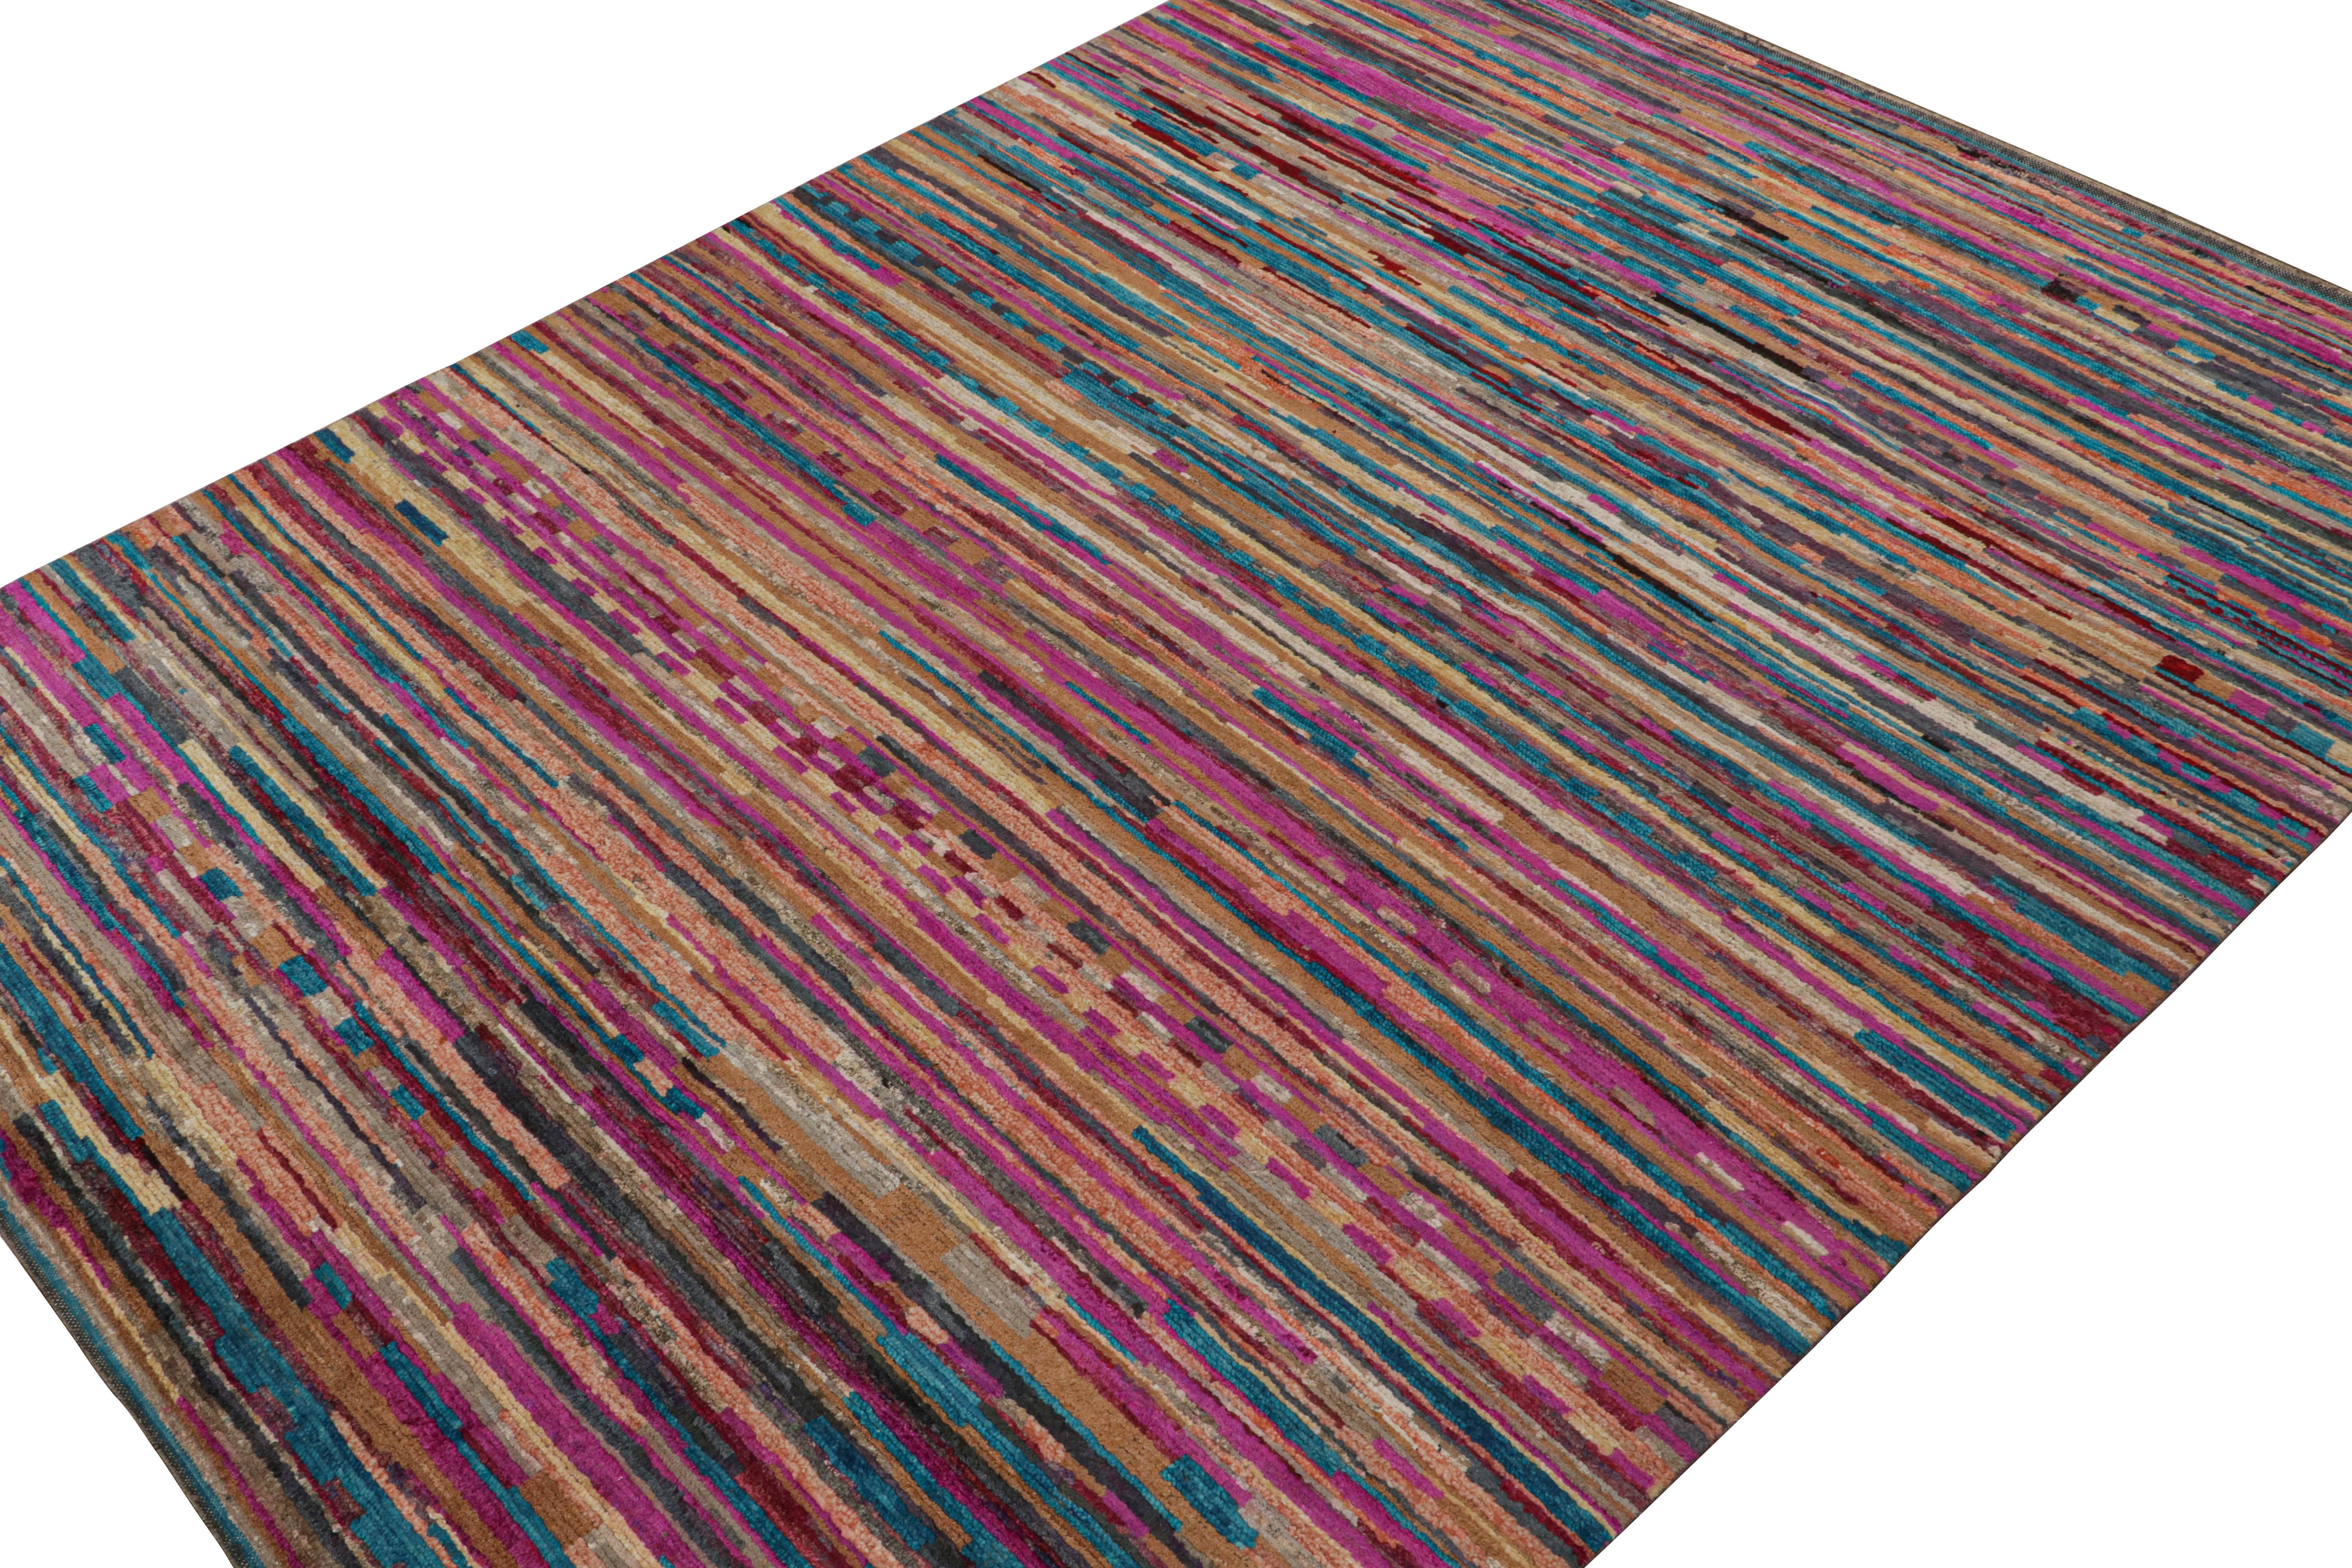 Hand-knotted in wool and silk, this 9x12 modern rug is a new addition to the Moroccan rug collection by Rug & Kilim.

On the Design: 

Keen eyes will admire the sheer variety of colors, and the fabulous sense of movement and subtle patterns within.